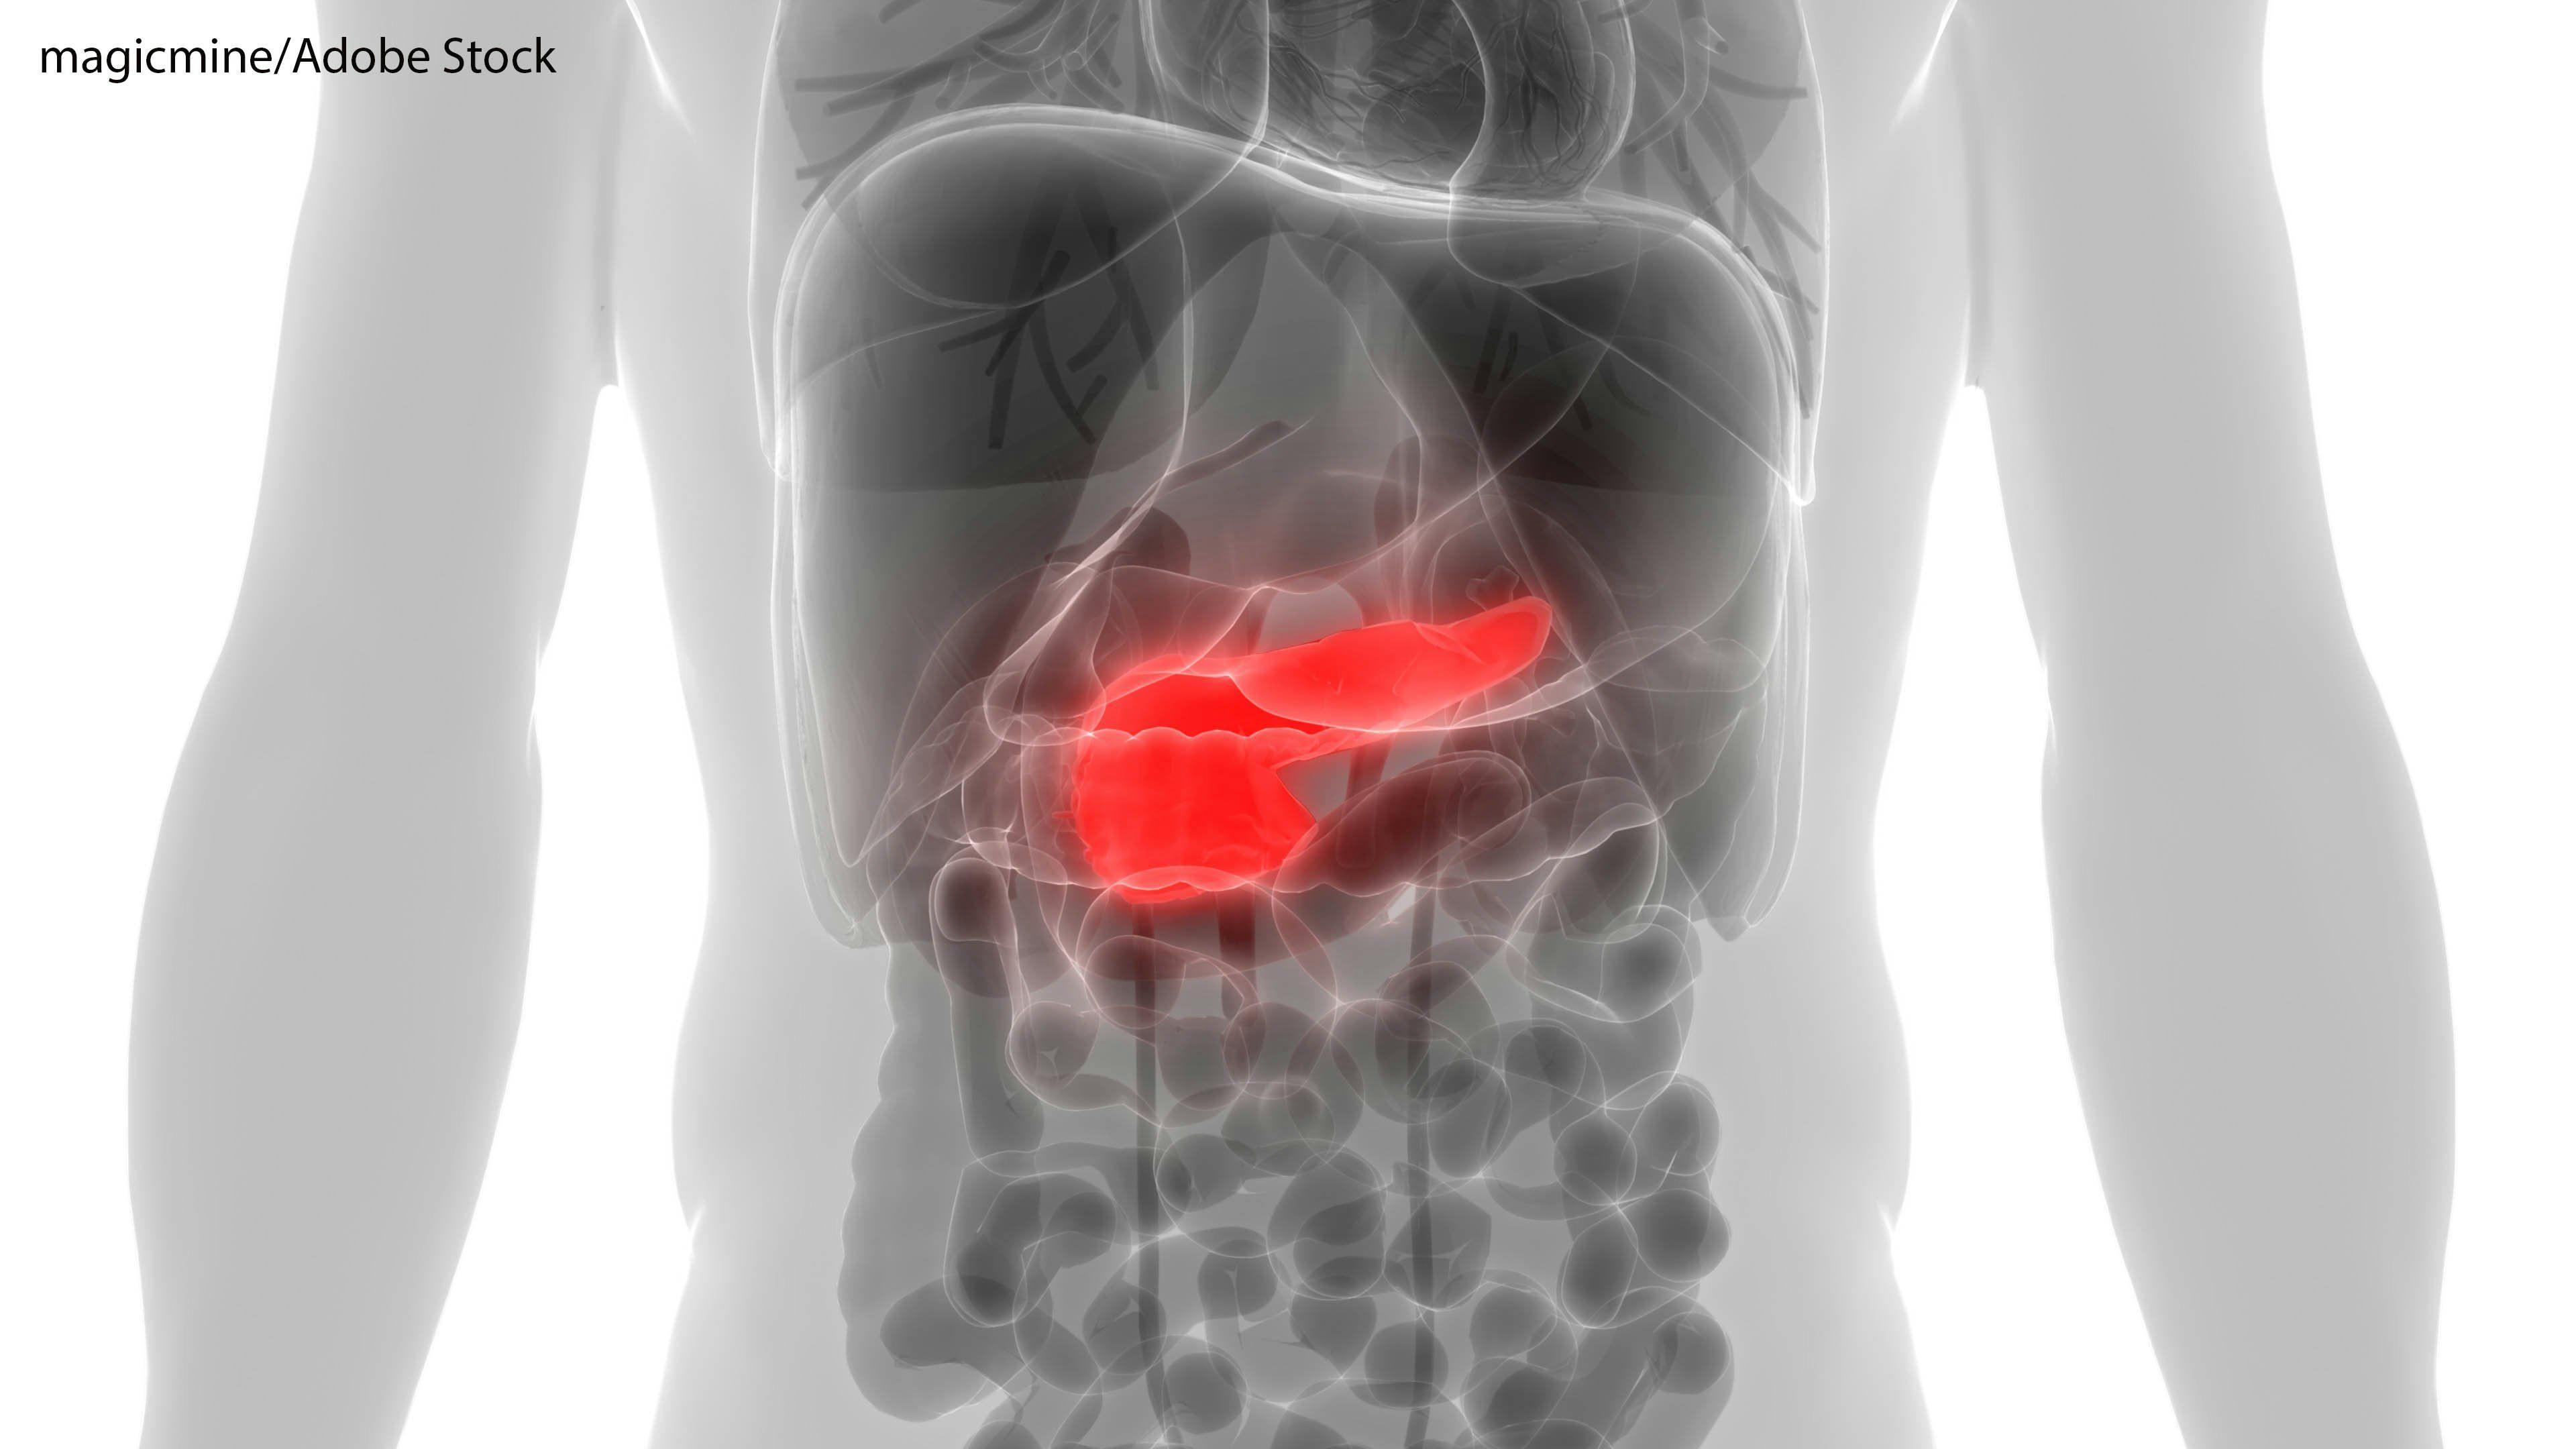 Can CT-Based Biomarkers Help Guide Pancreatic Cancer Therapy?